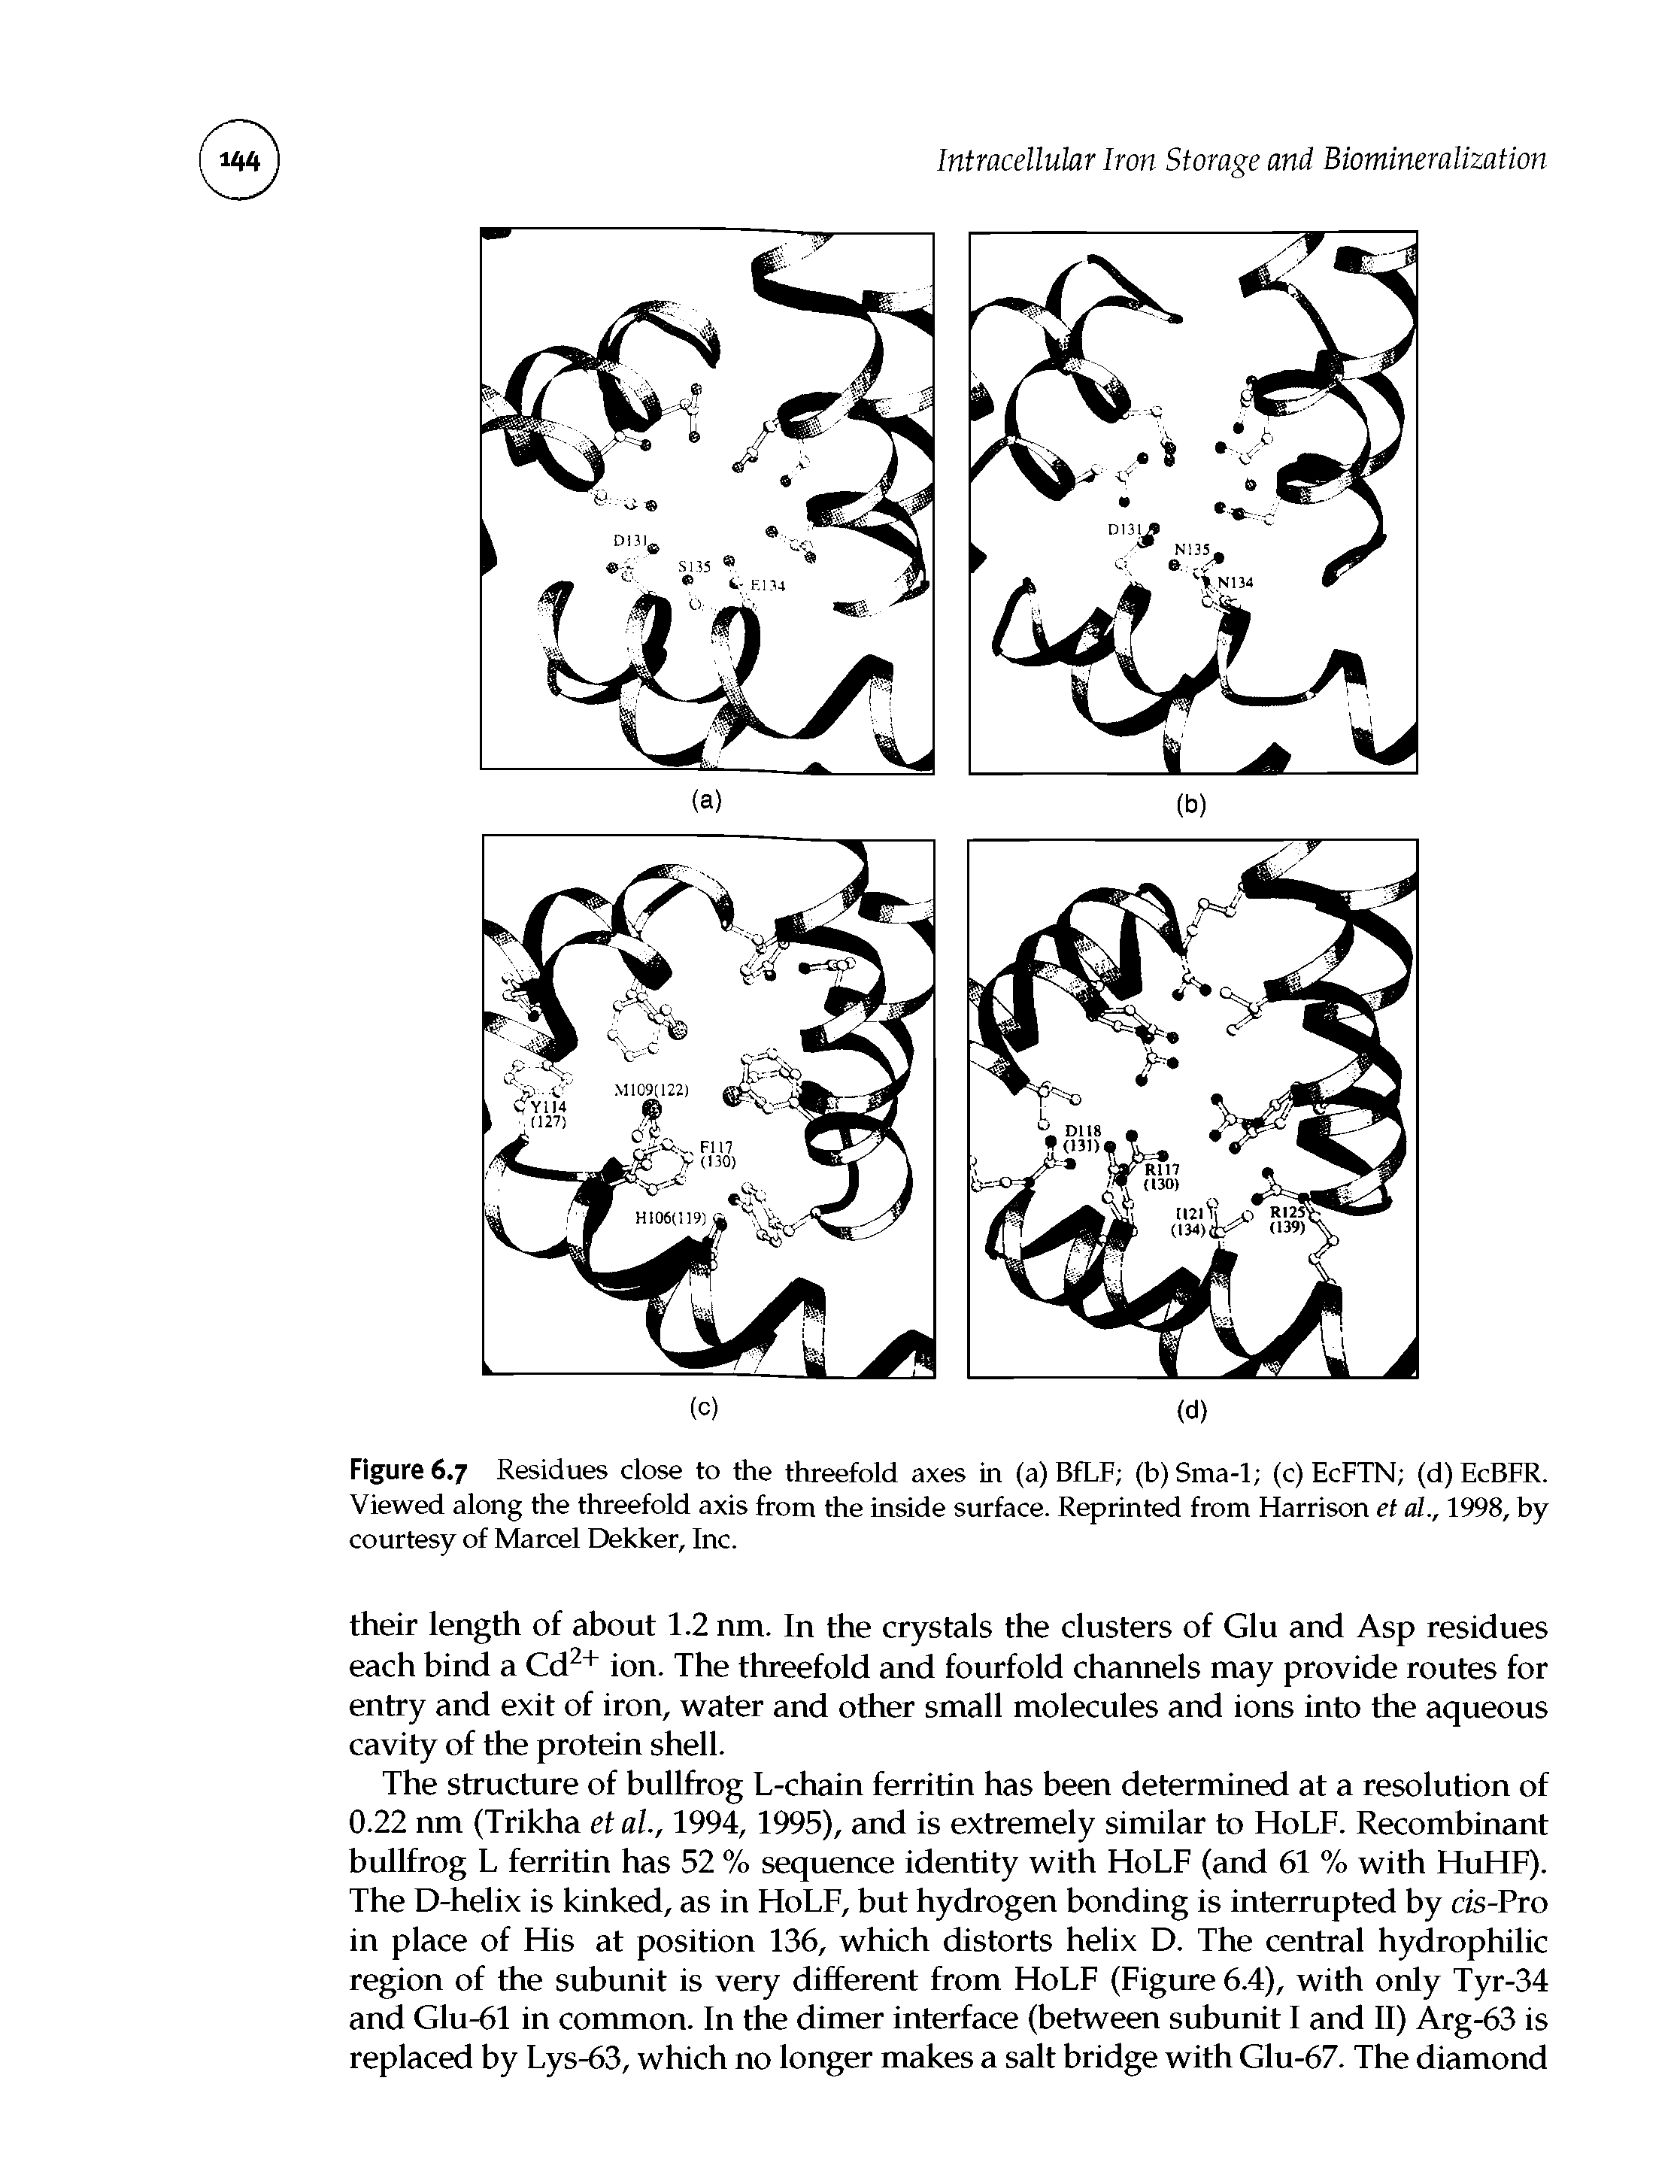 Figure 6.7 Residues close to the threefold axes in (a) BfLF (b)Sma-l (c) EcFTN (d)EcBFR. Viewed along the threefold axis from the inside surface. Reprinted from Harrison et al., 1998, by courtesy of Marcel Dekker, Inc.